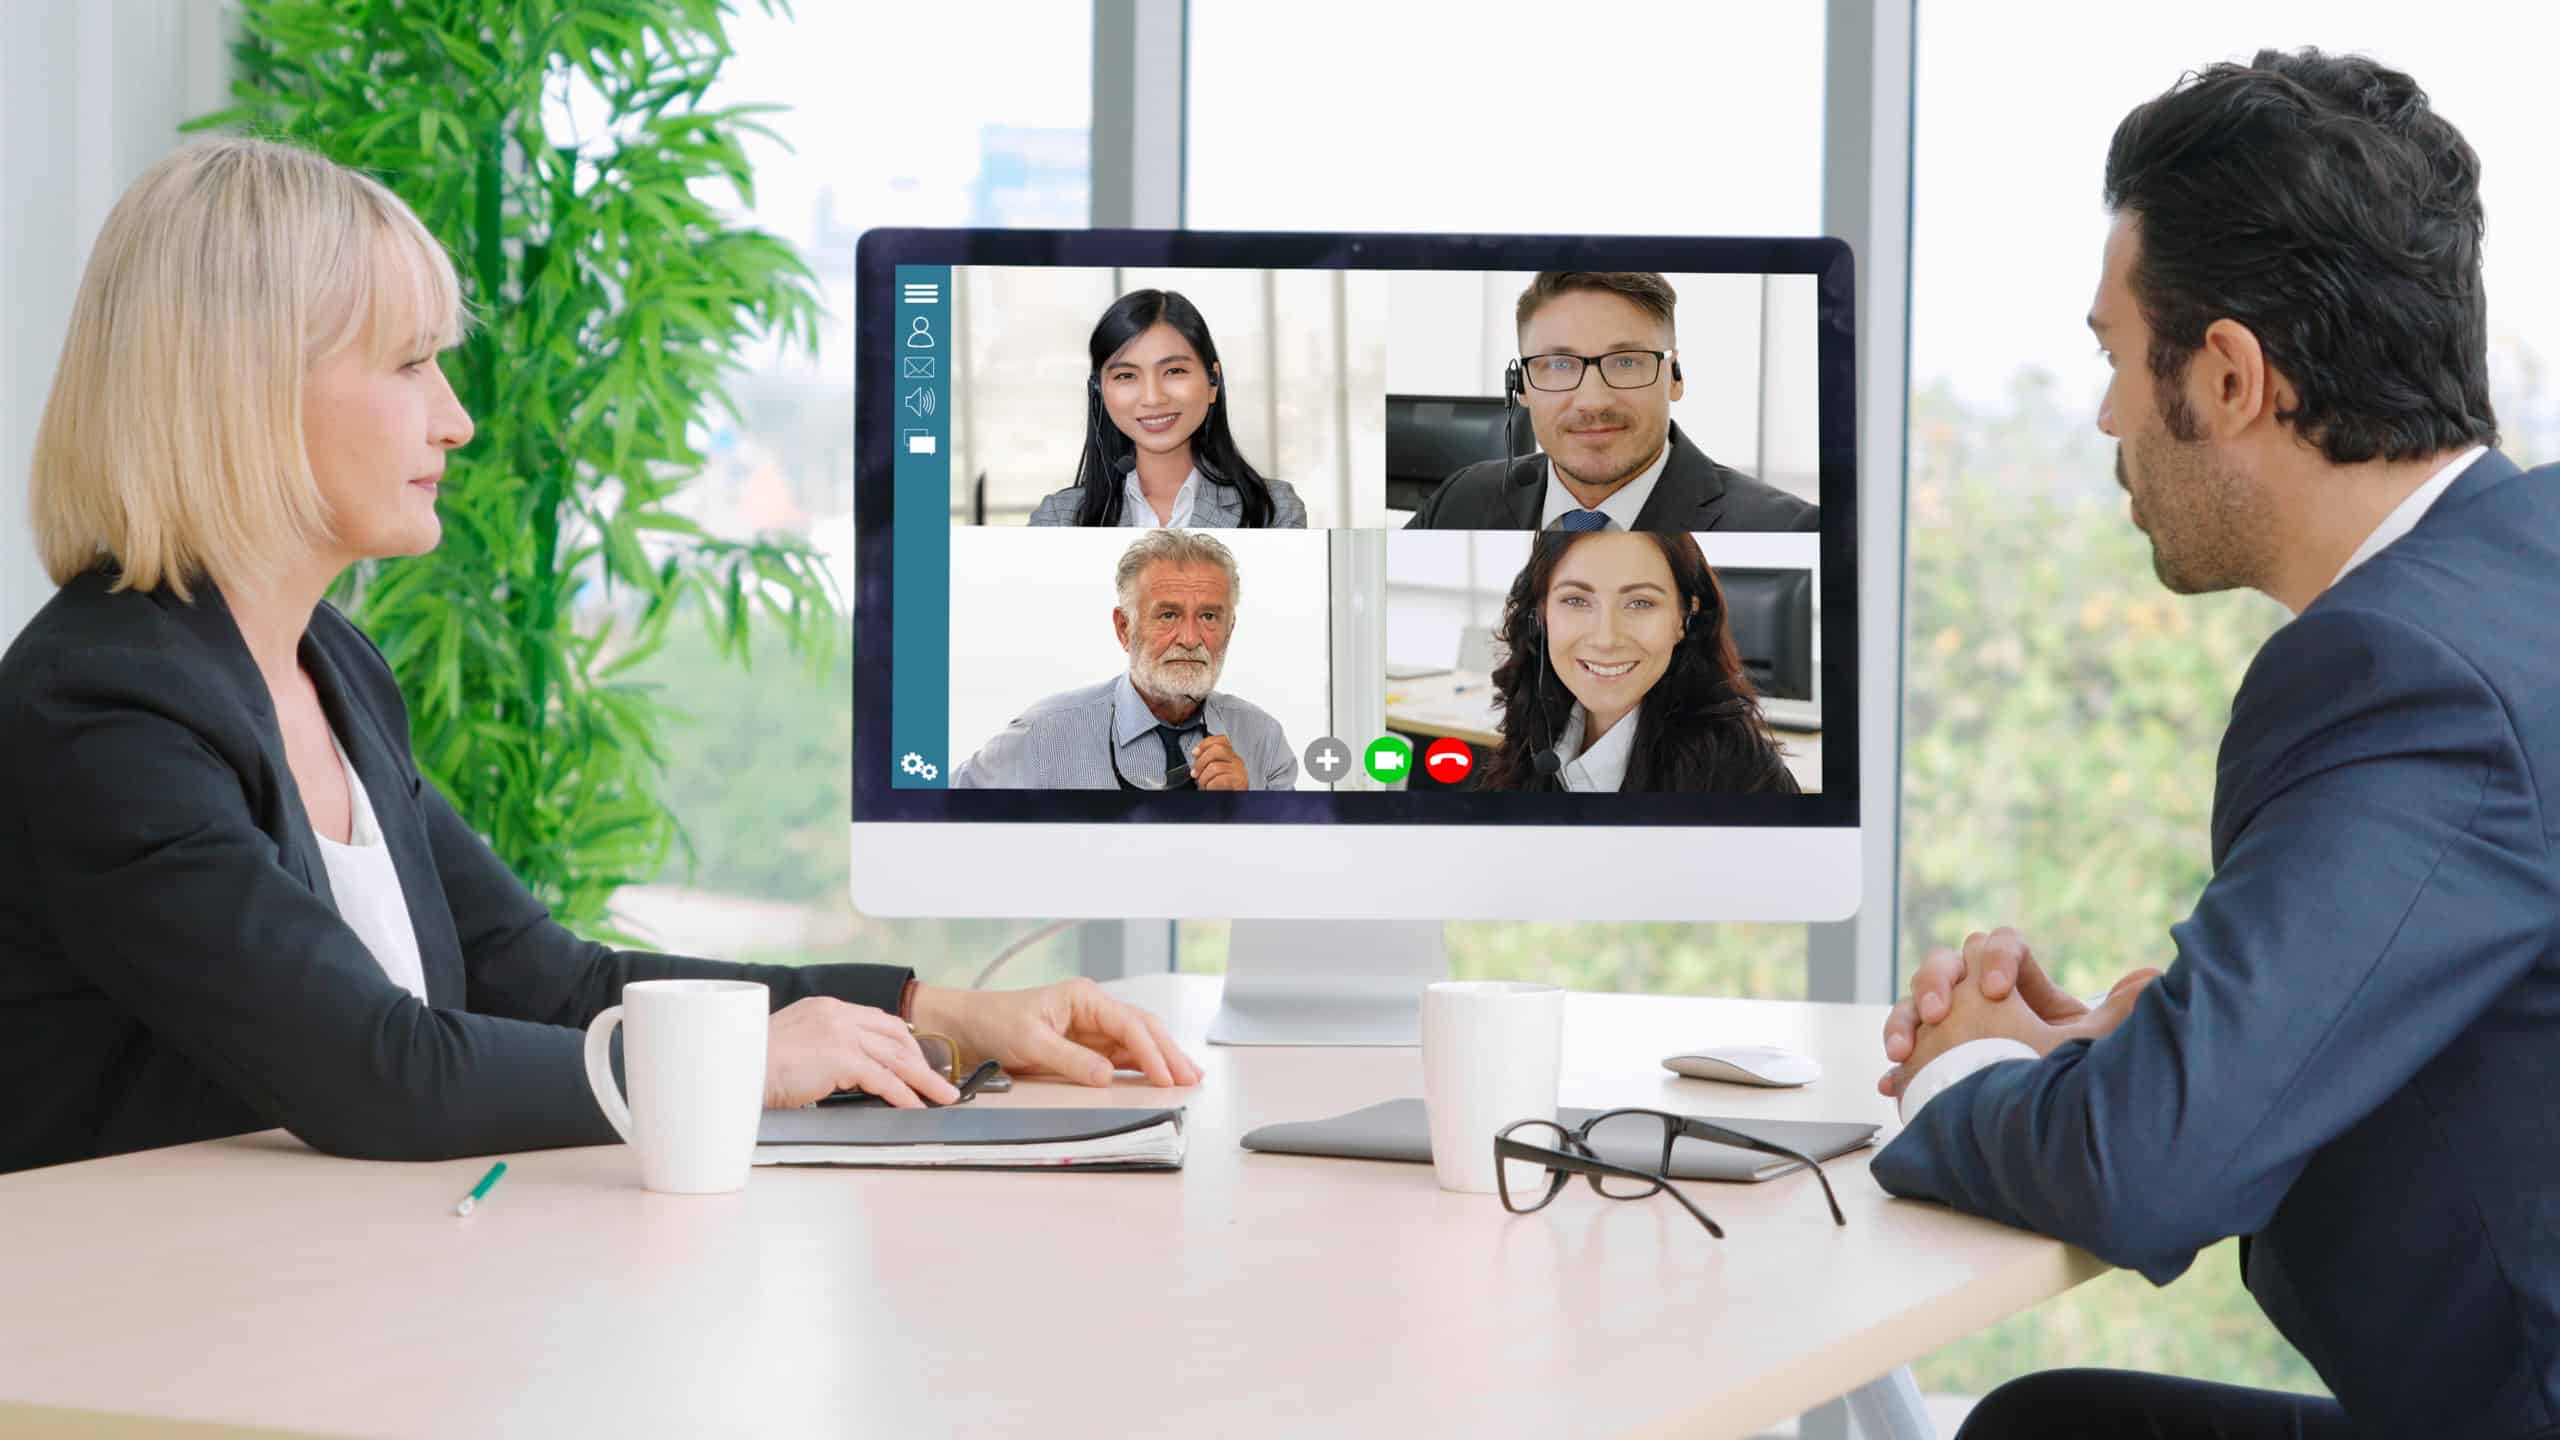 A female and a male manager meet in person while video conferencing their team members.